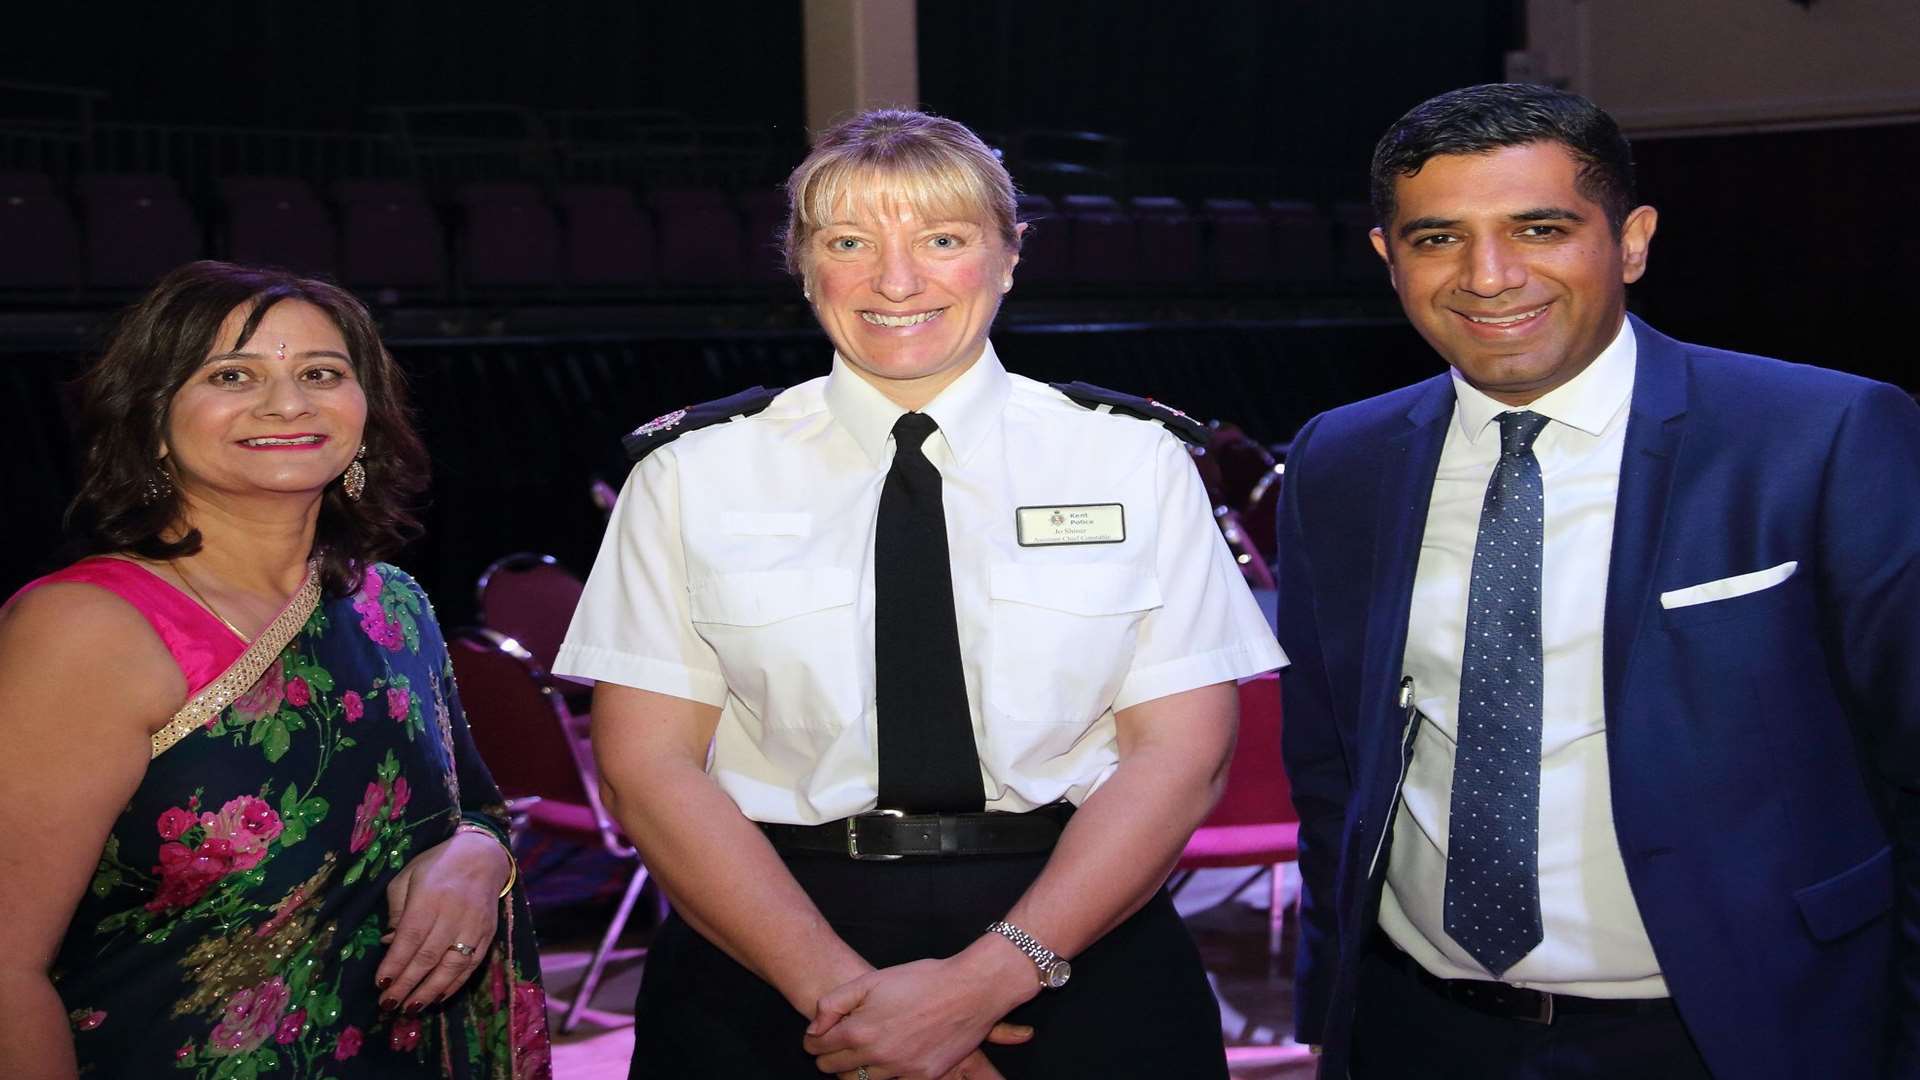 Carol Gosal of Rethink Mental Illness, with Asst Chf Con Jo Shiner from Kent Police and Gurvinder Sandher of the Kent Equality Cohesion Council